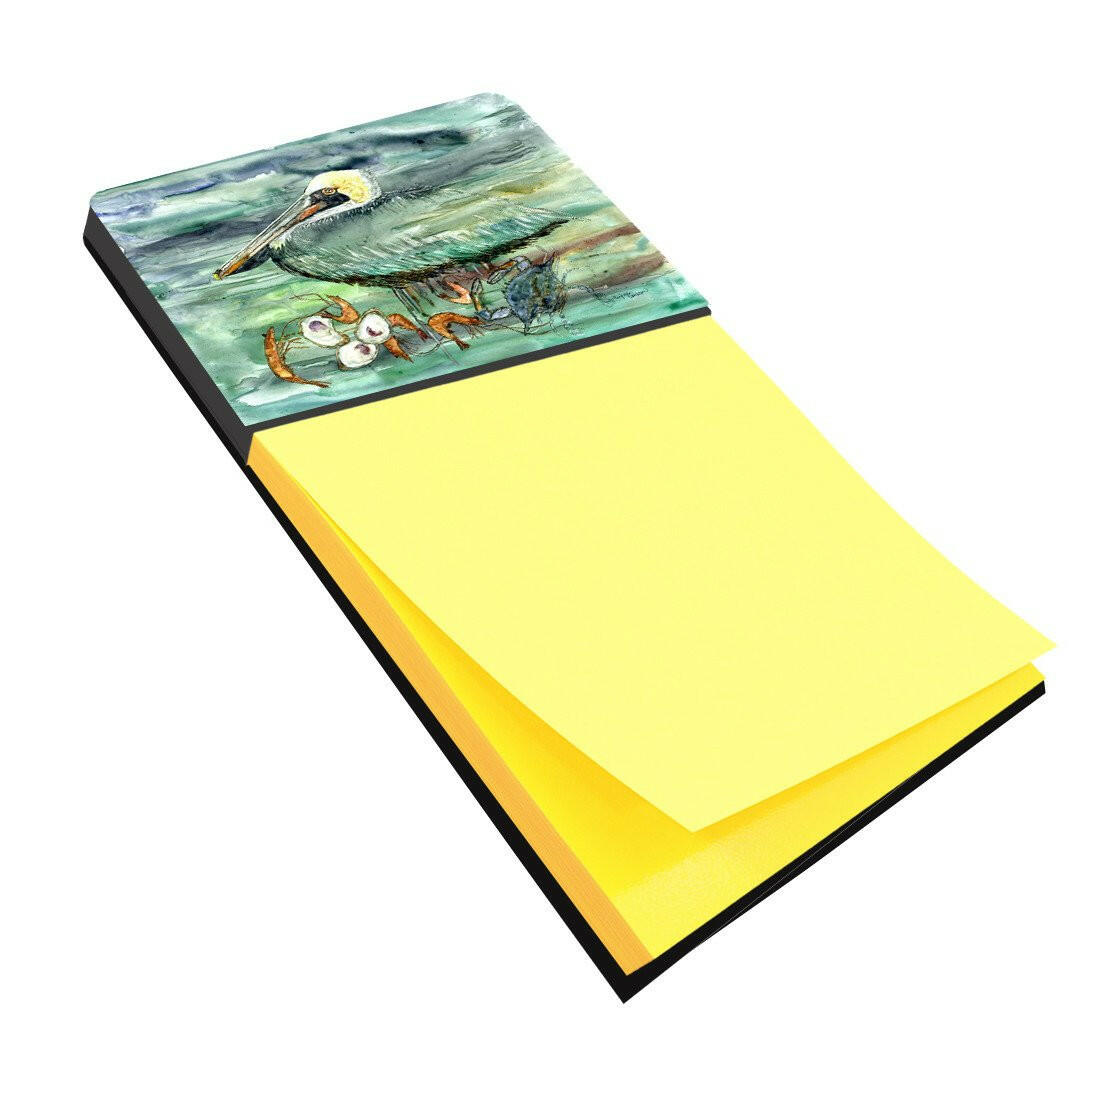 Watery Pelican, Shrimp, Crab and Oysters Sticky Note Holder 8978SN by Caroline's Treasures